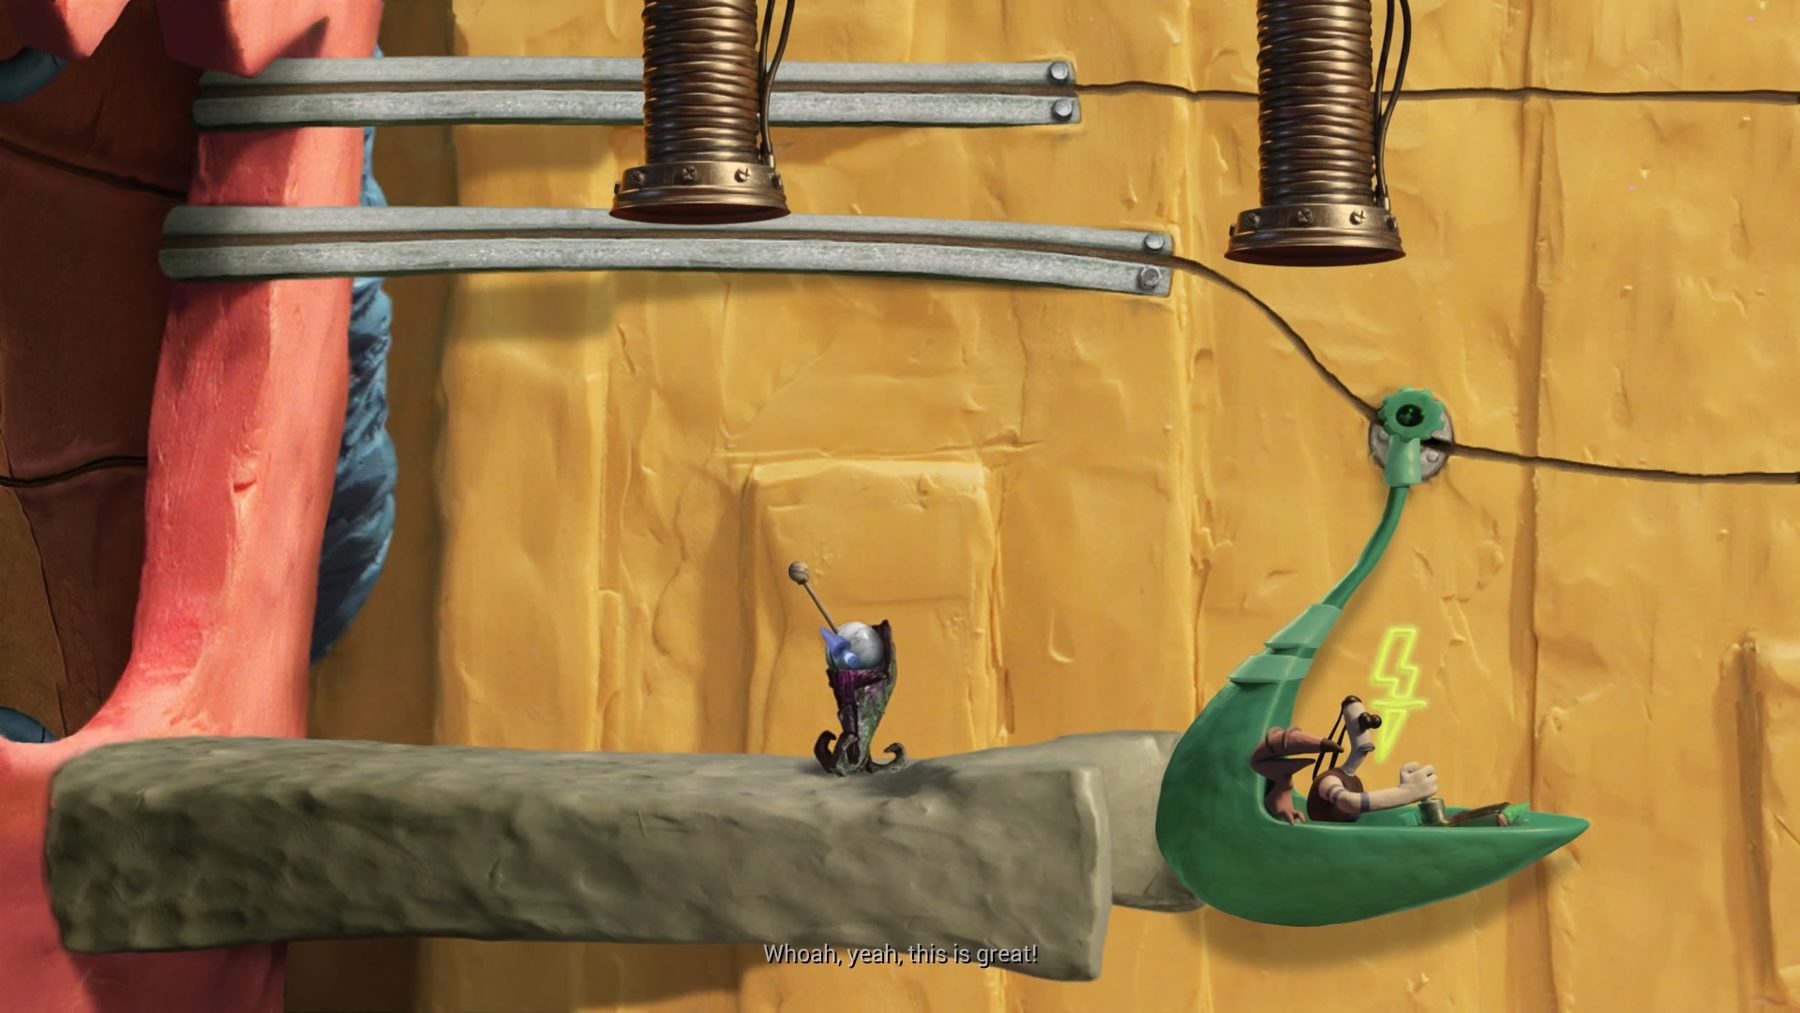 Screenshot for the game Armikrog [Update 5] (2015) PC | RePack by R.G. Mechanics